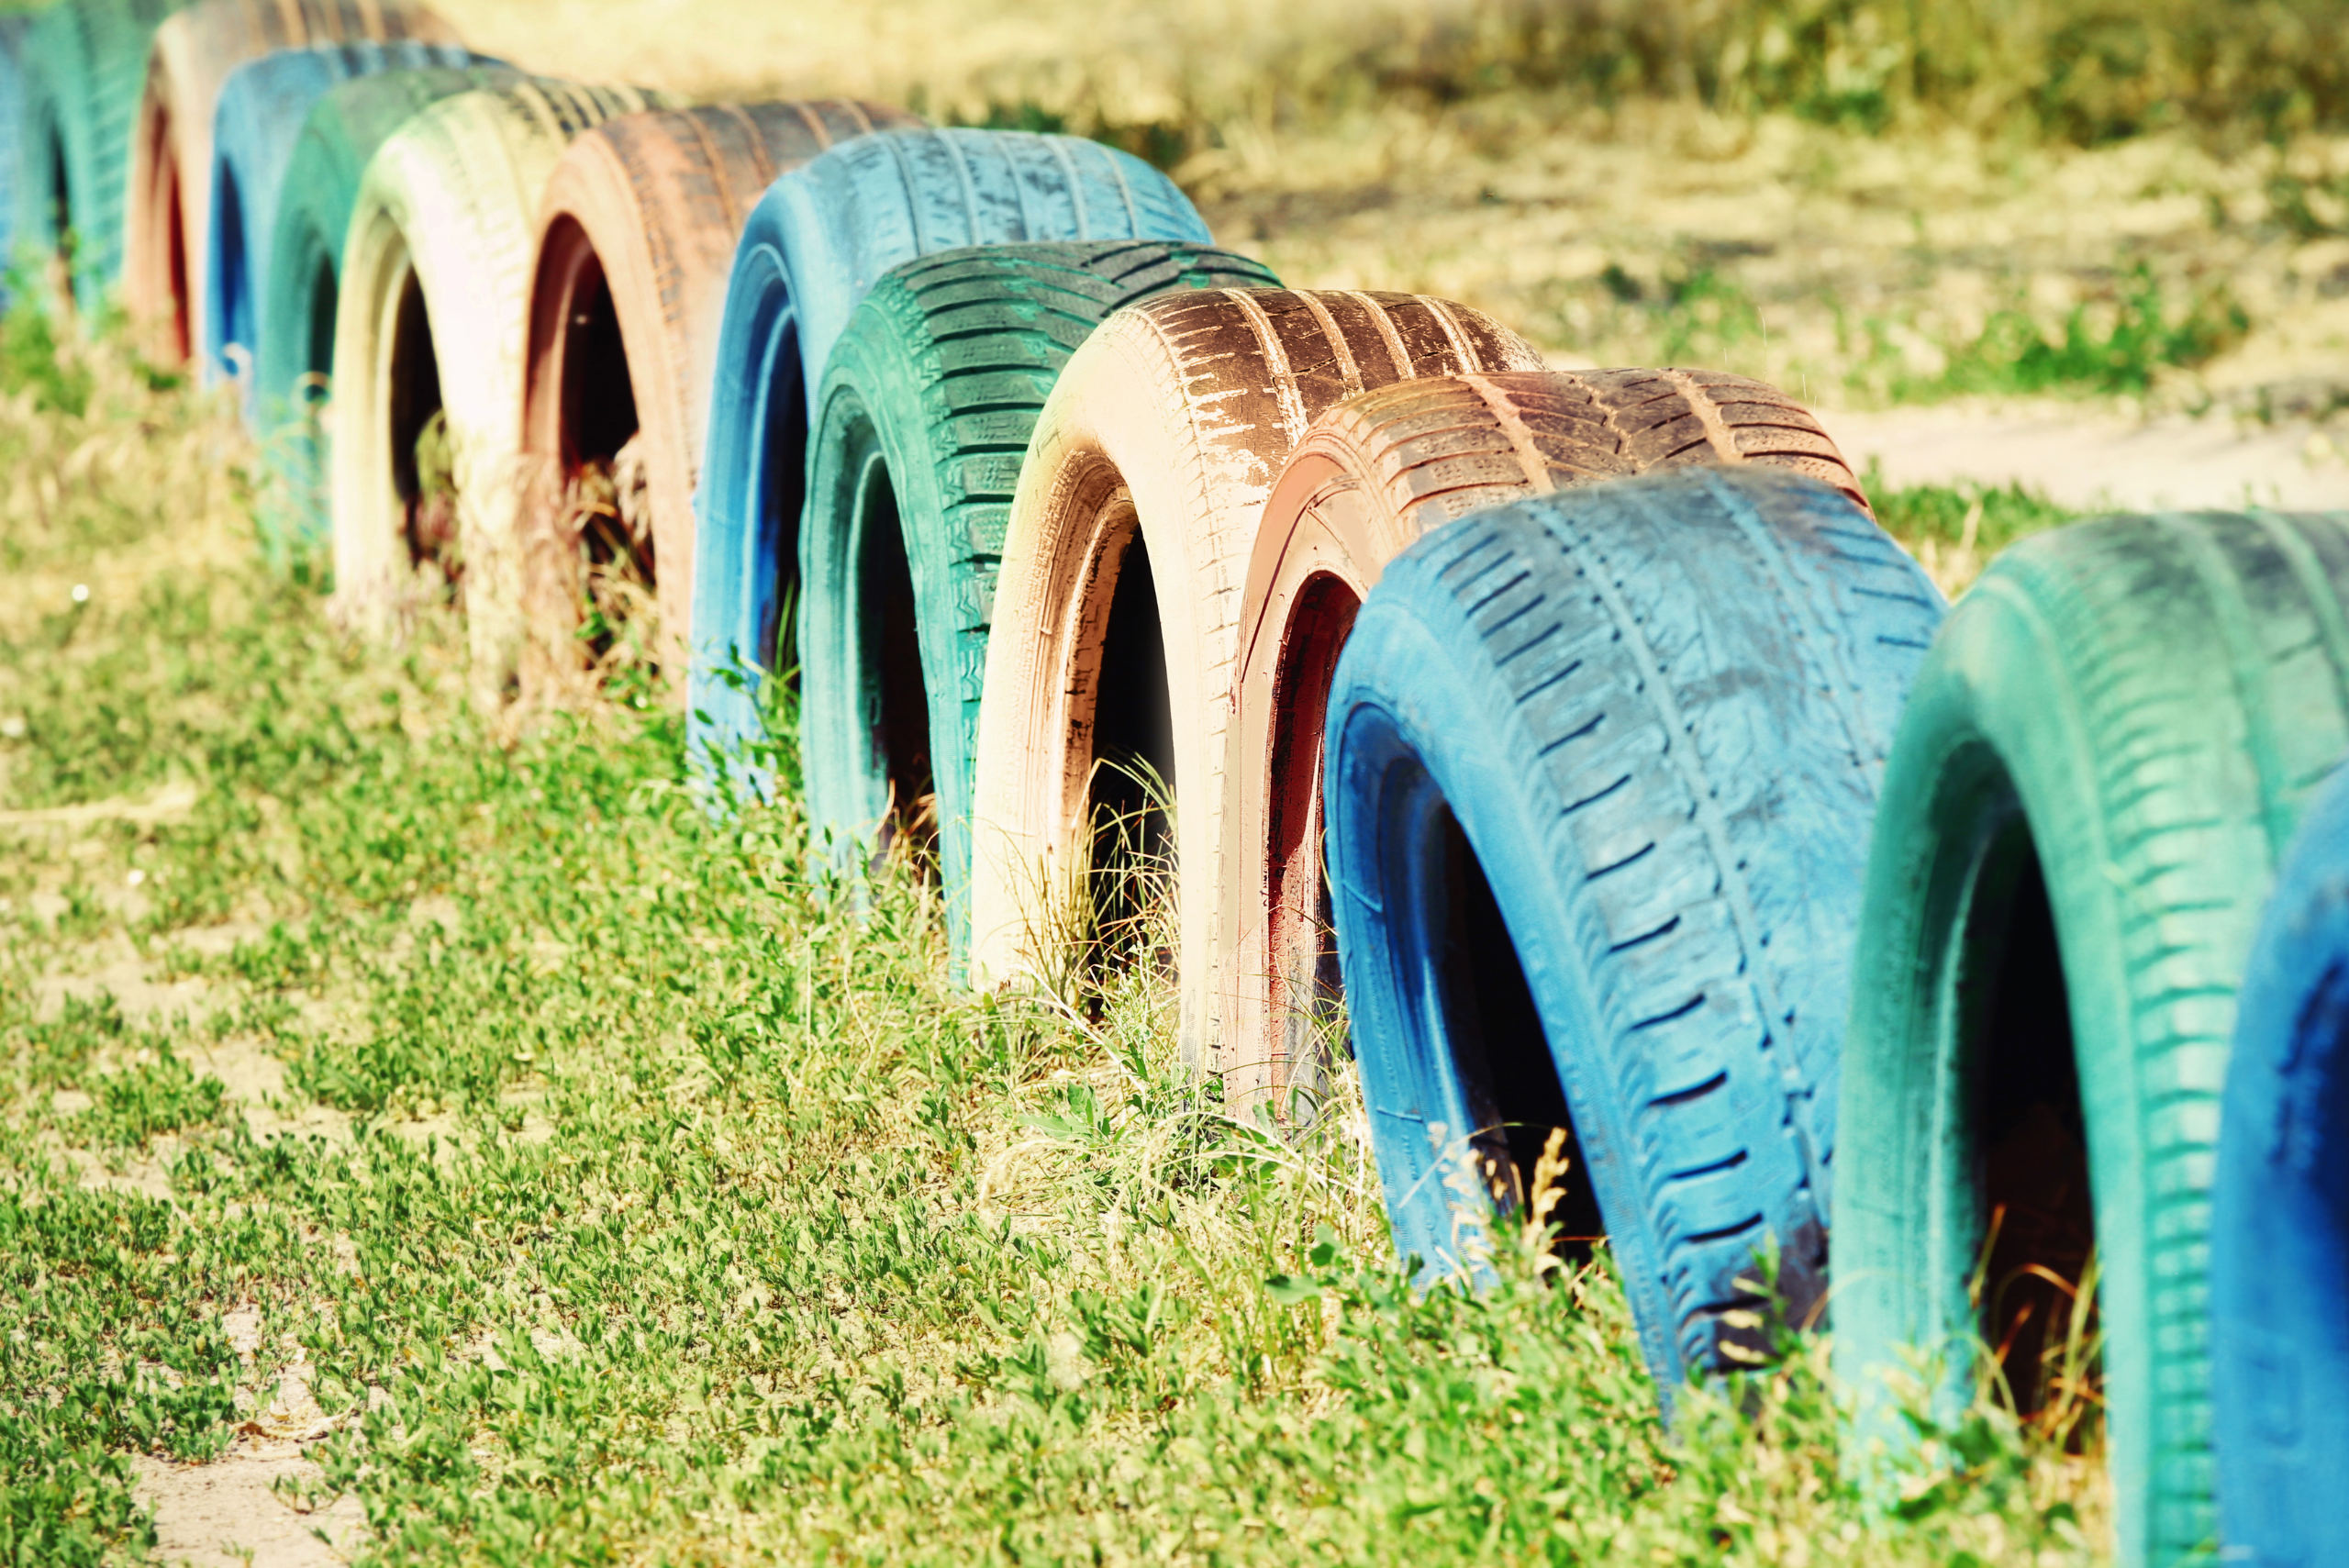 Tires cut in half and painted to create a small fence.